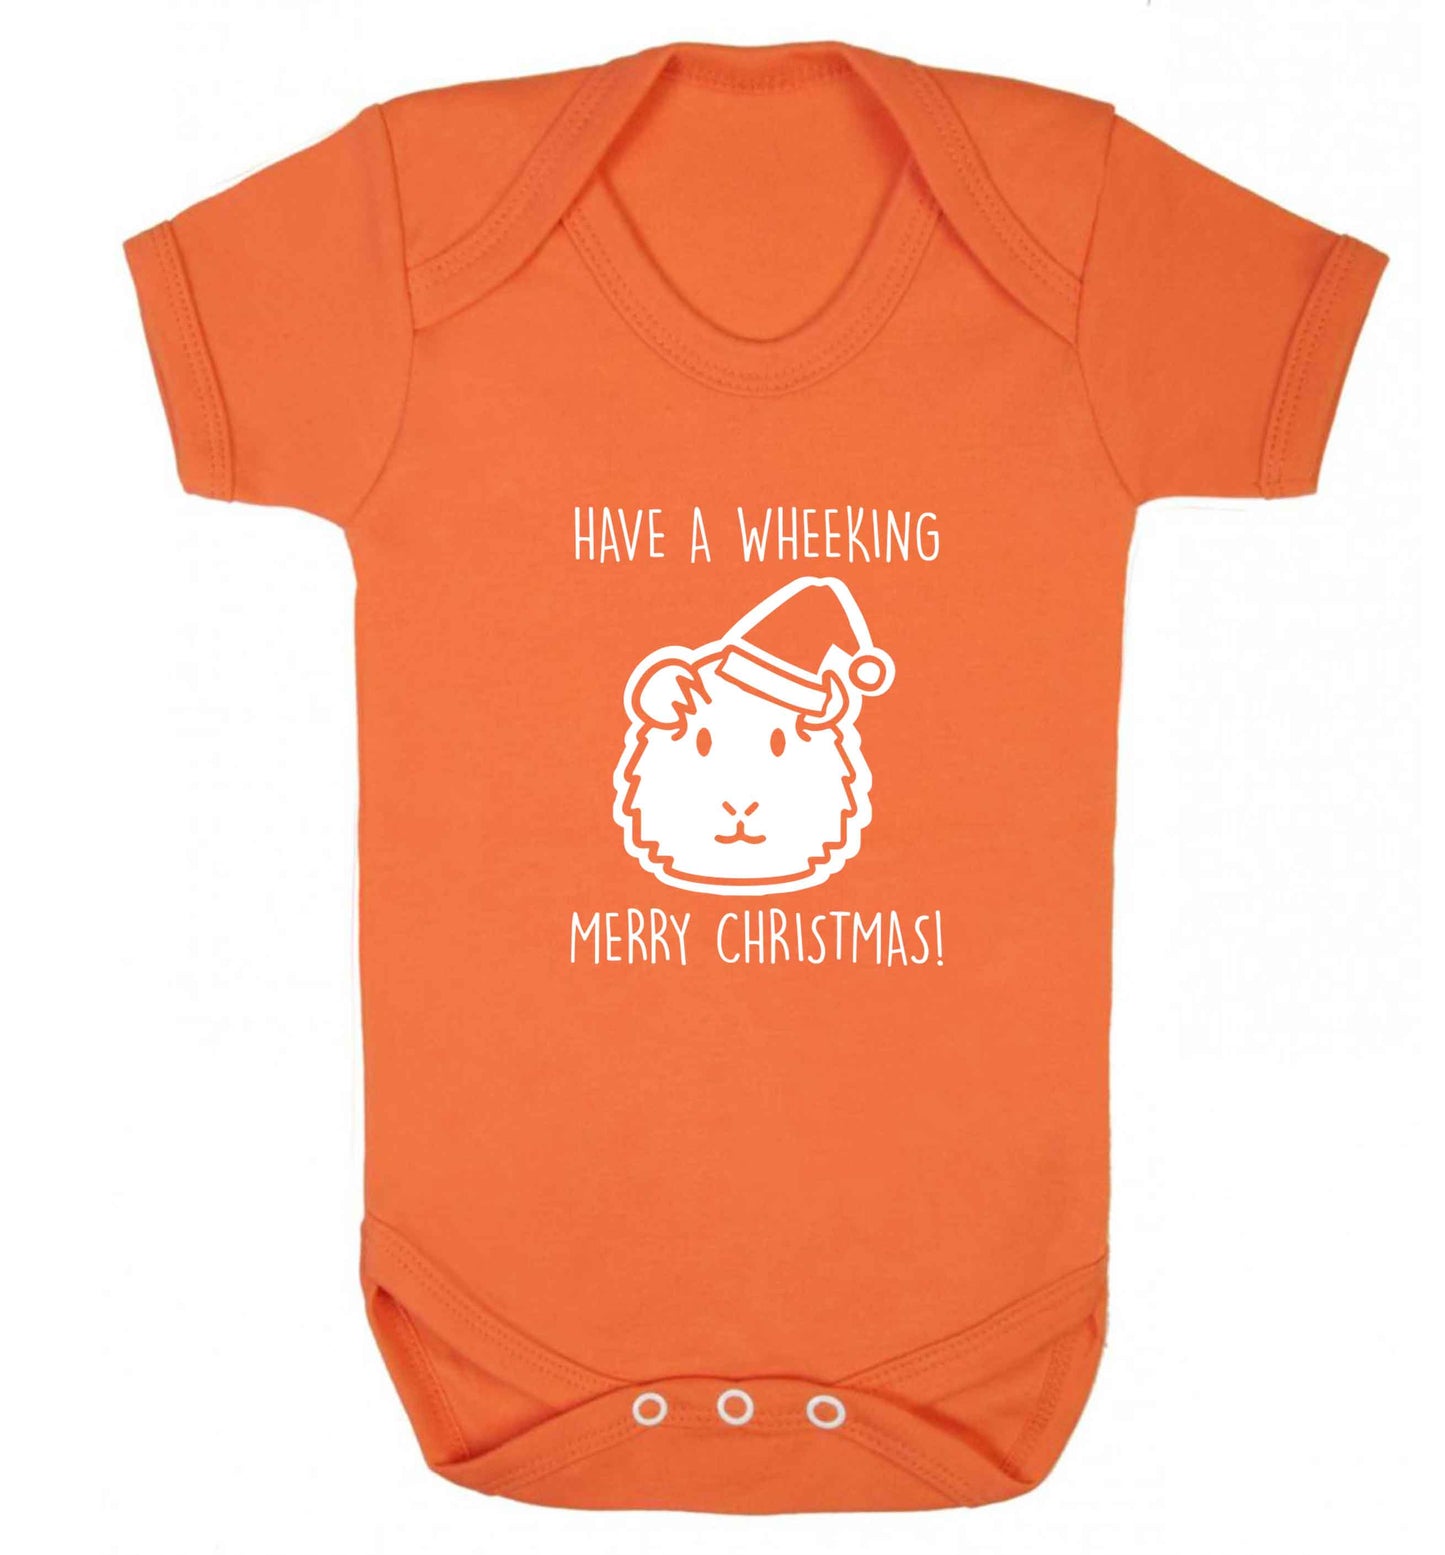 Have a wheeking merry Christmas baby vest orange 18-24 months